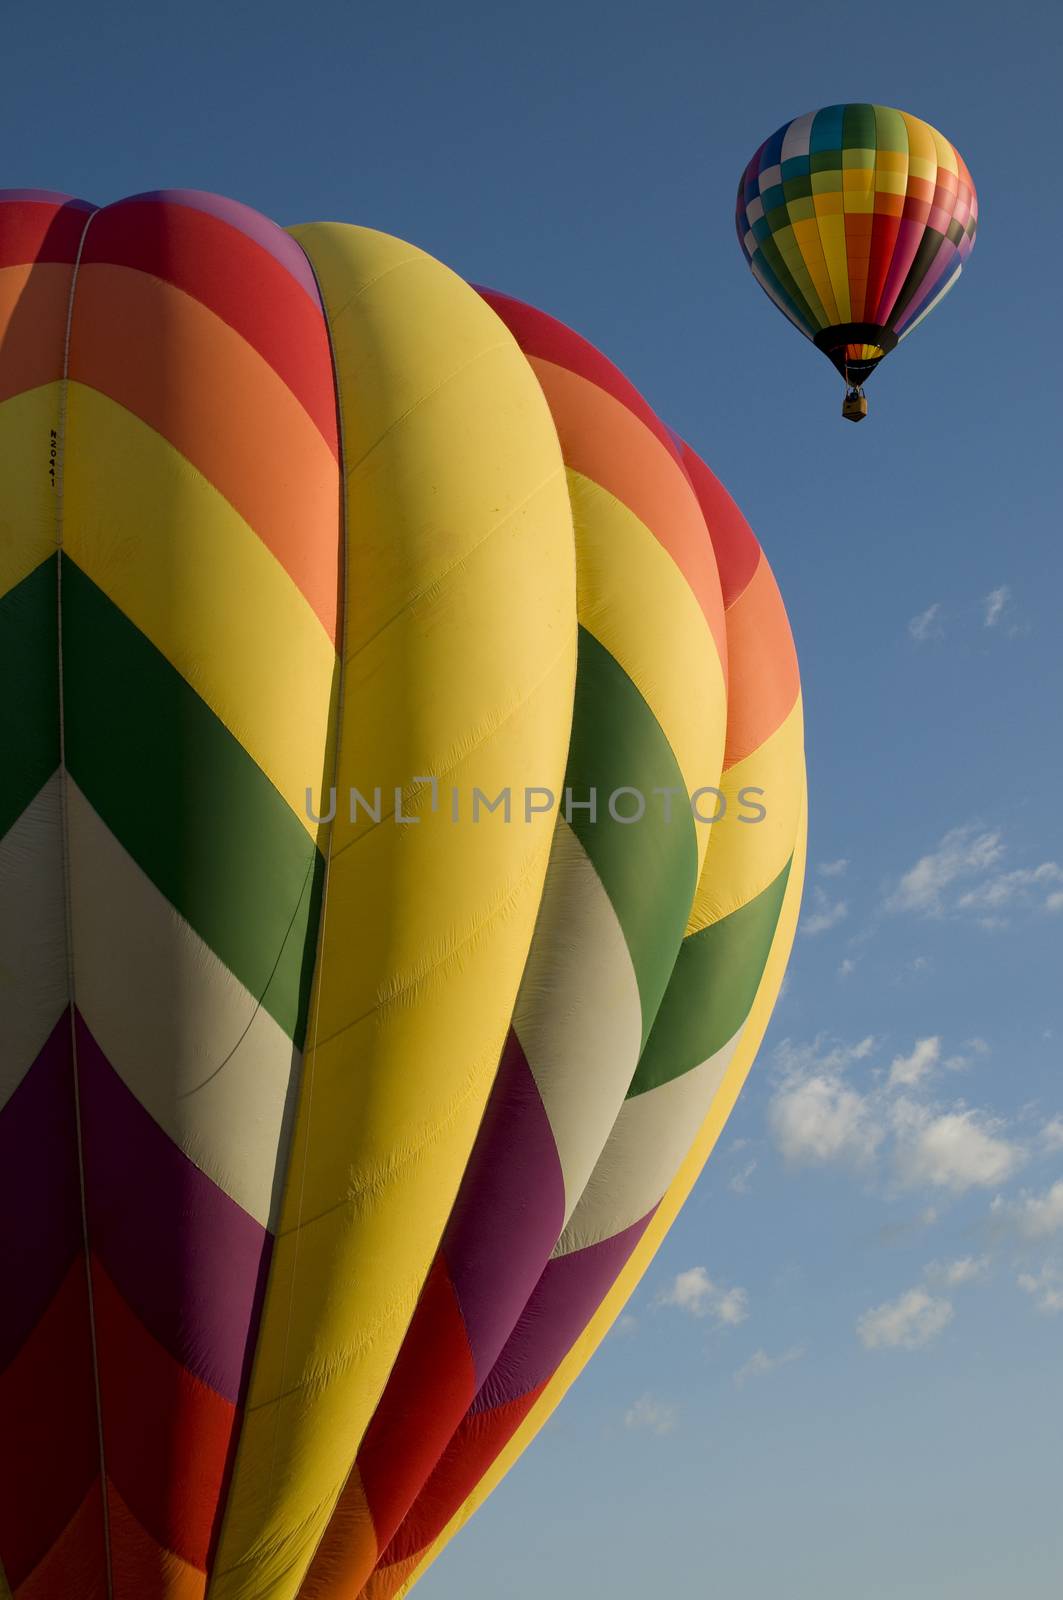 Colorful hot air balloons launching against a blue sky